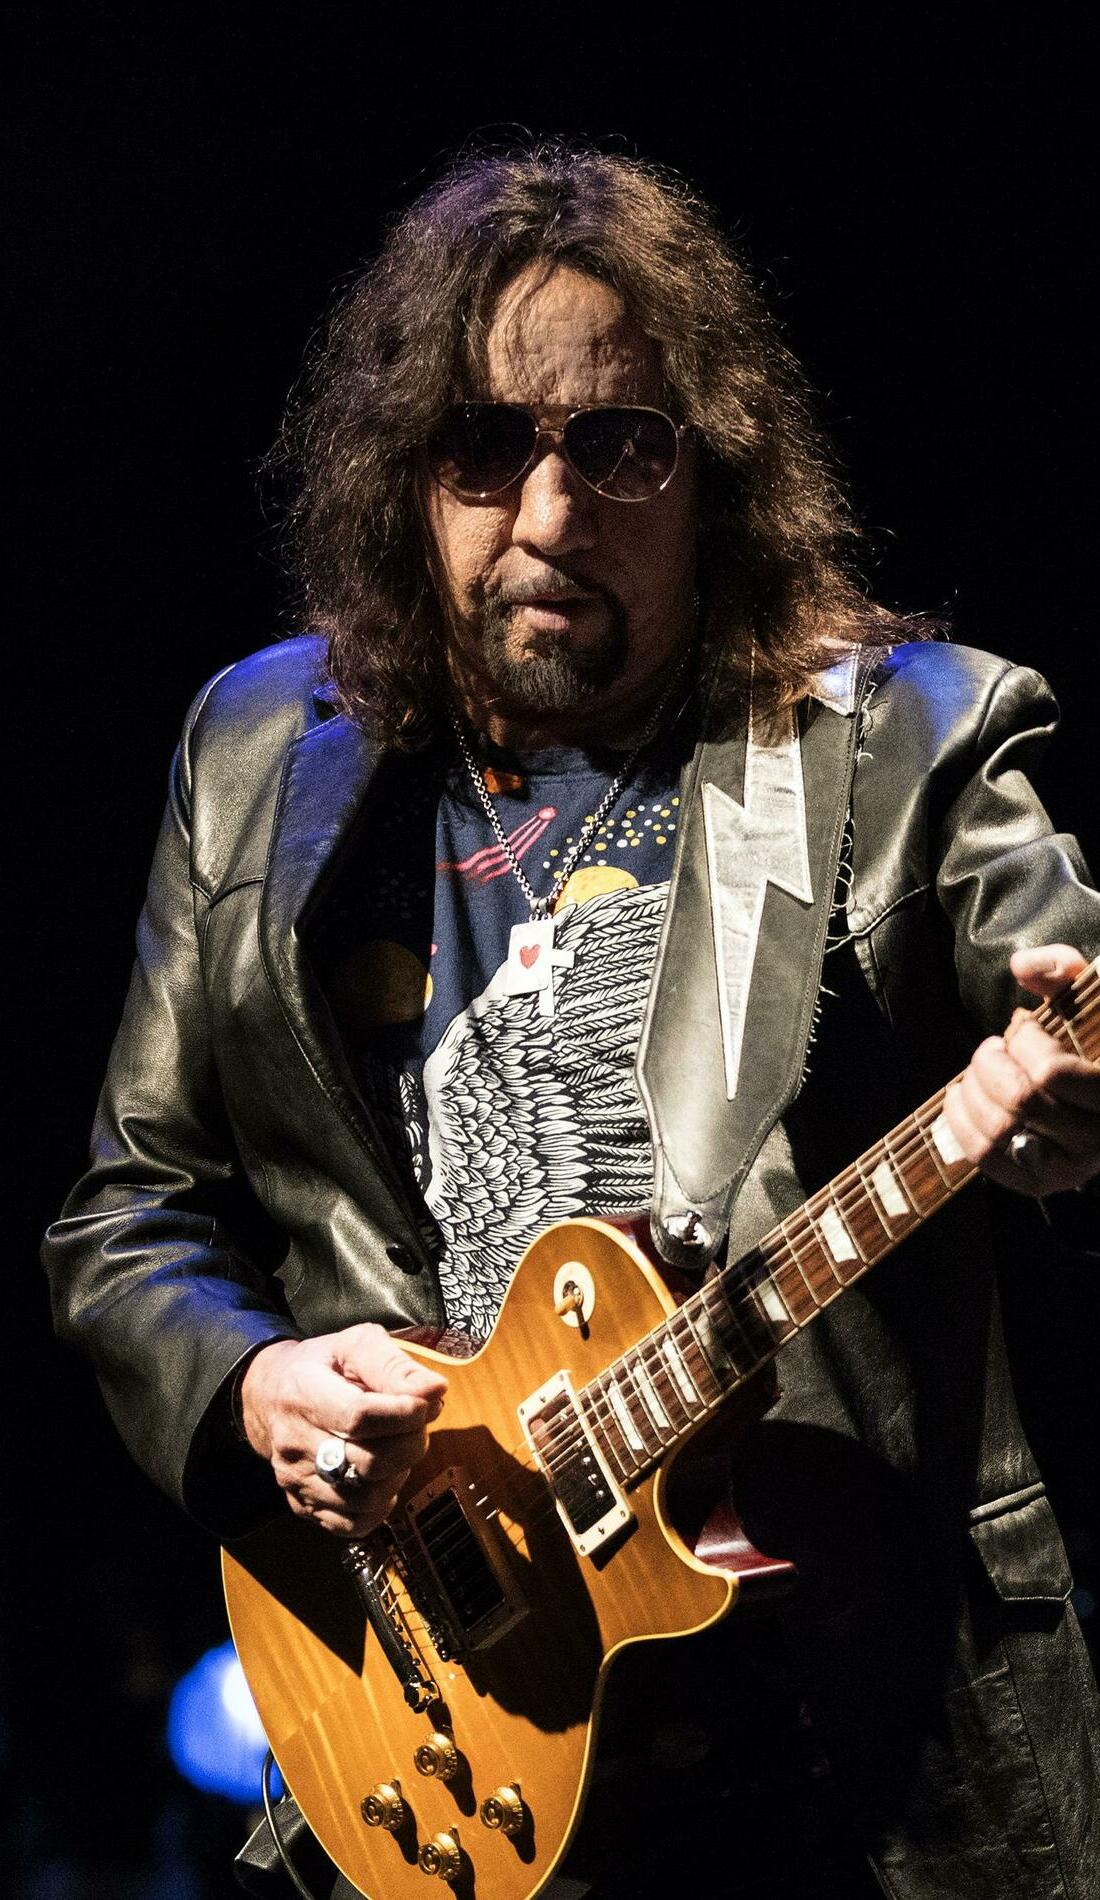 A Ace Frehley live event